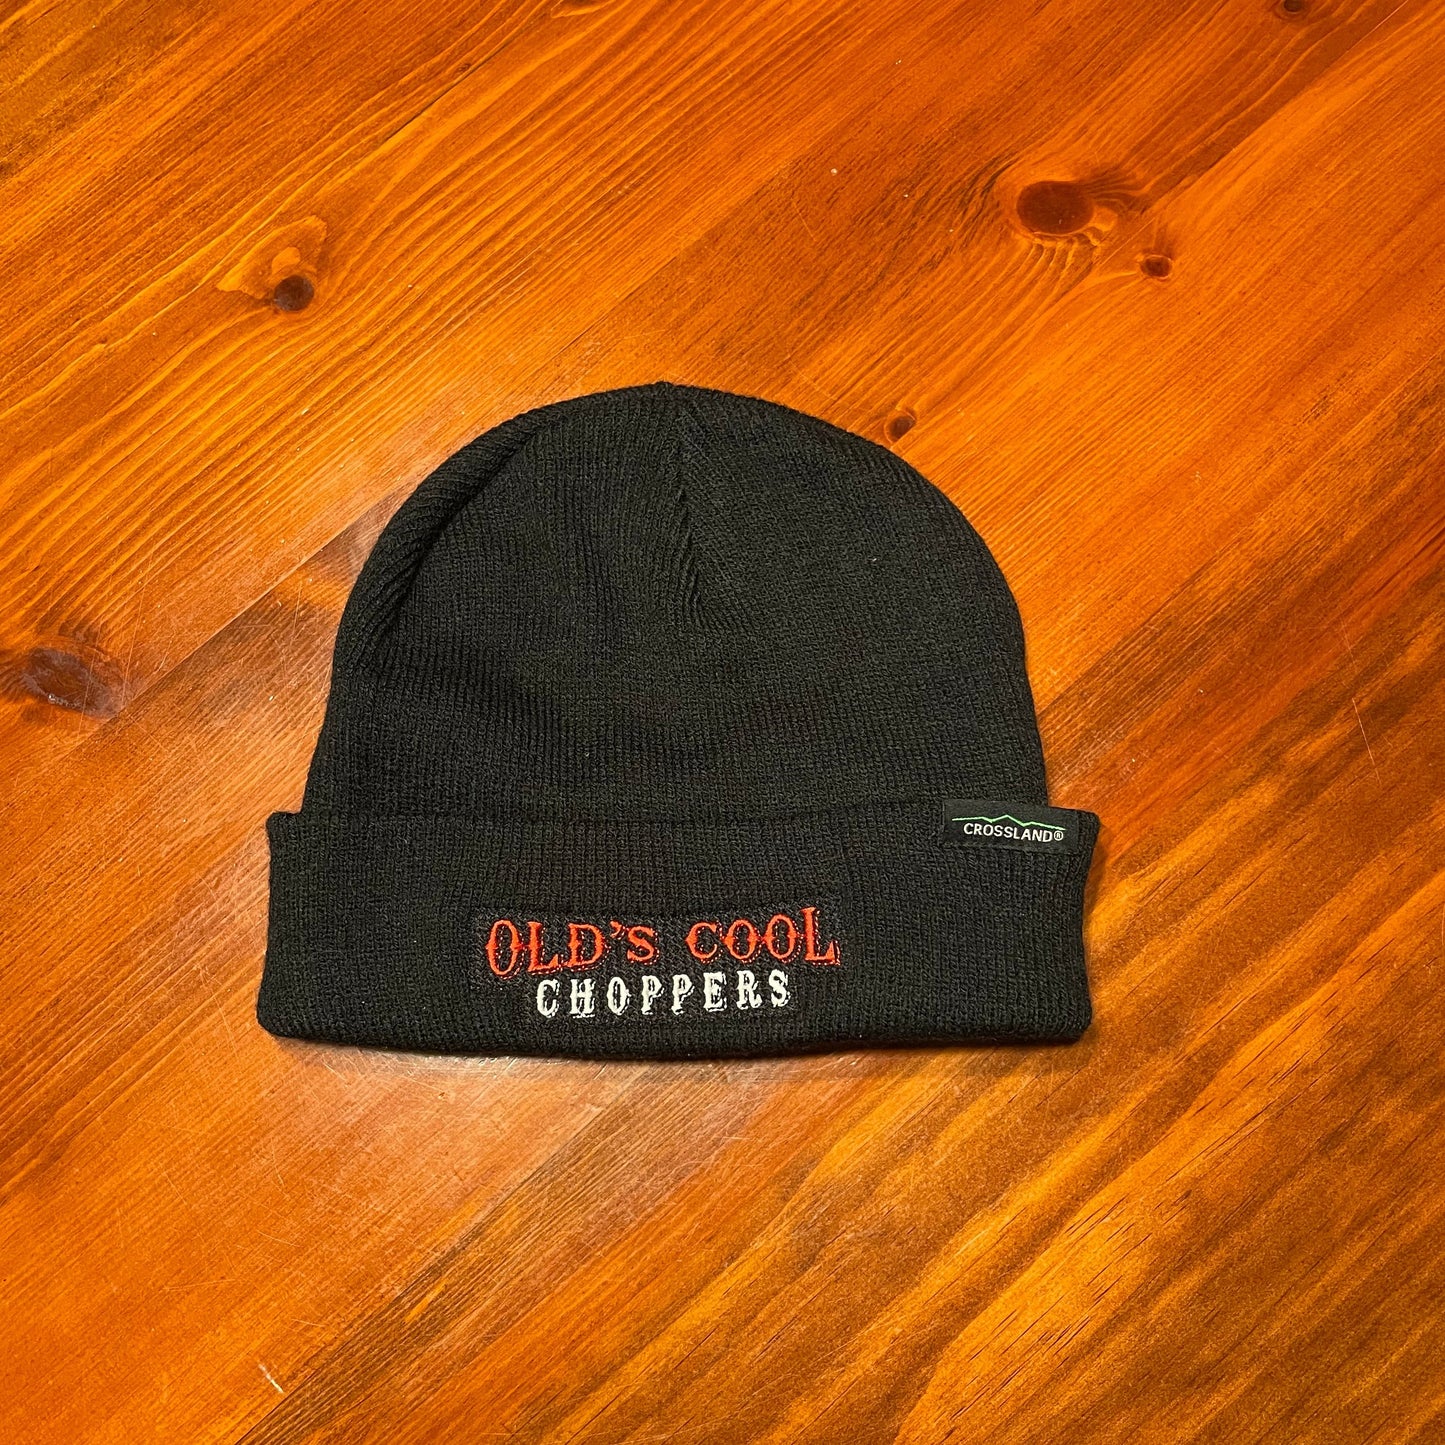 Old’s Cool Choppers Beanie